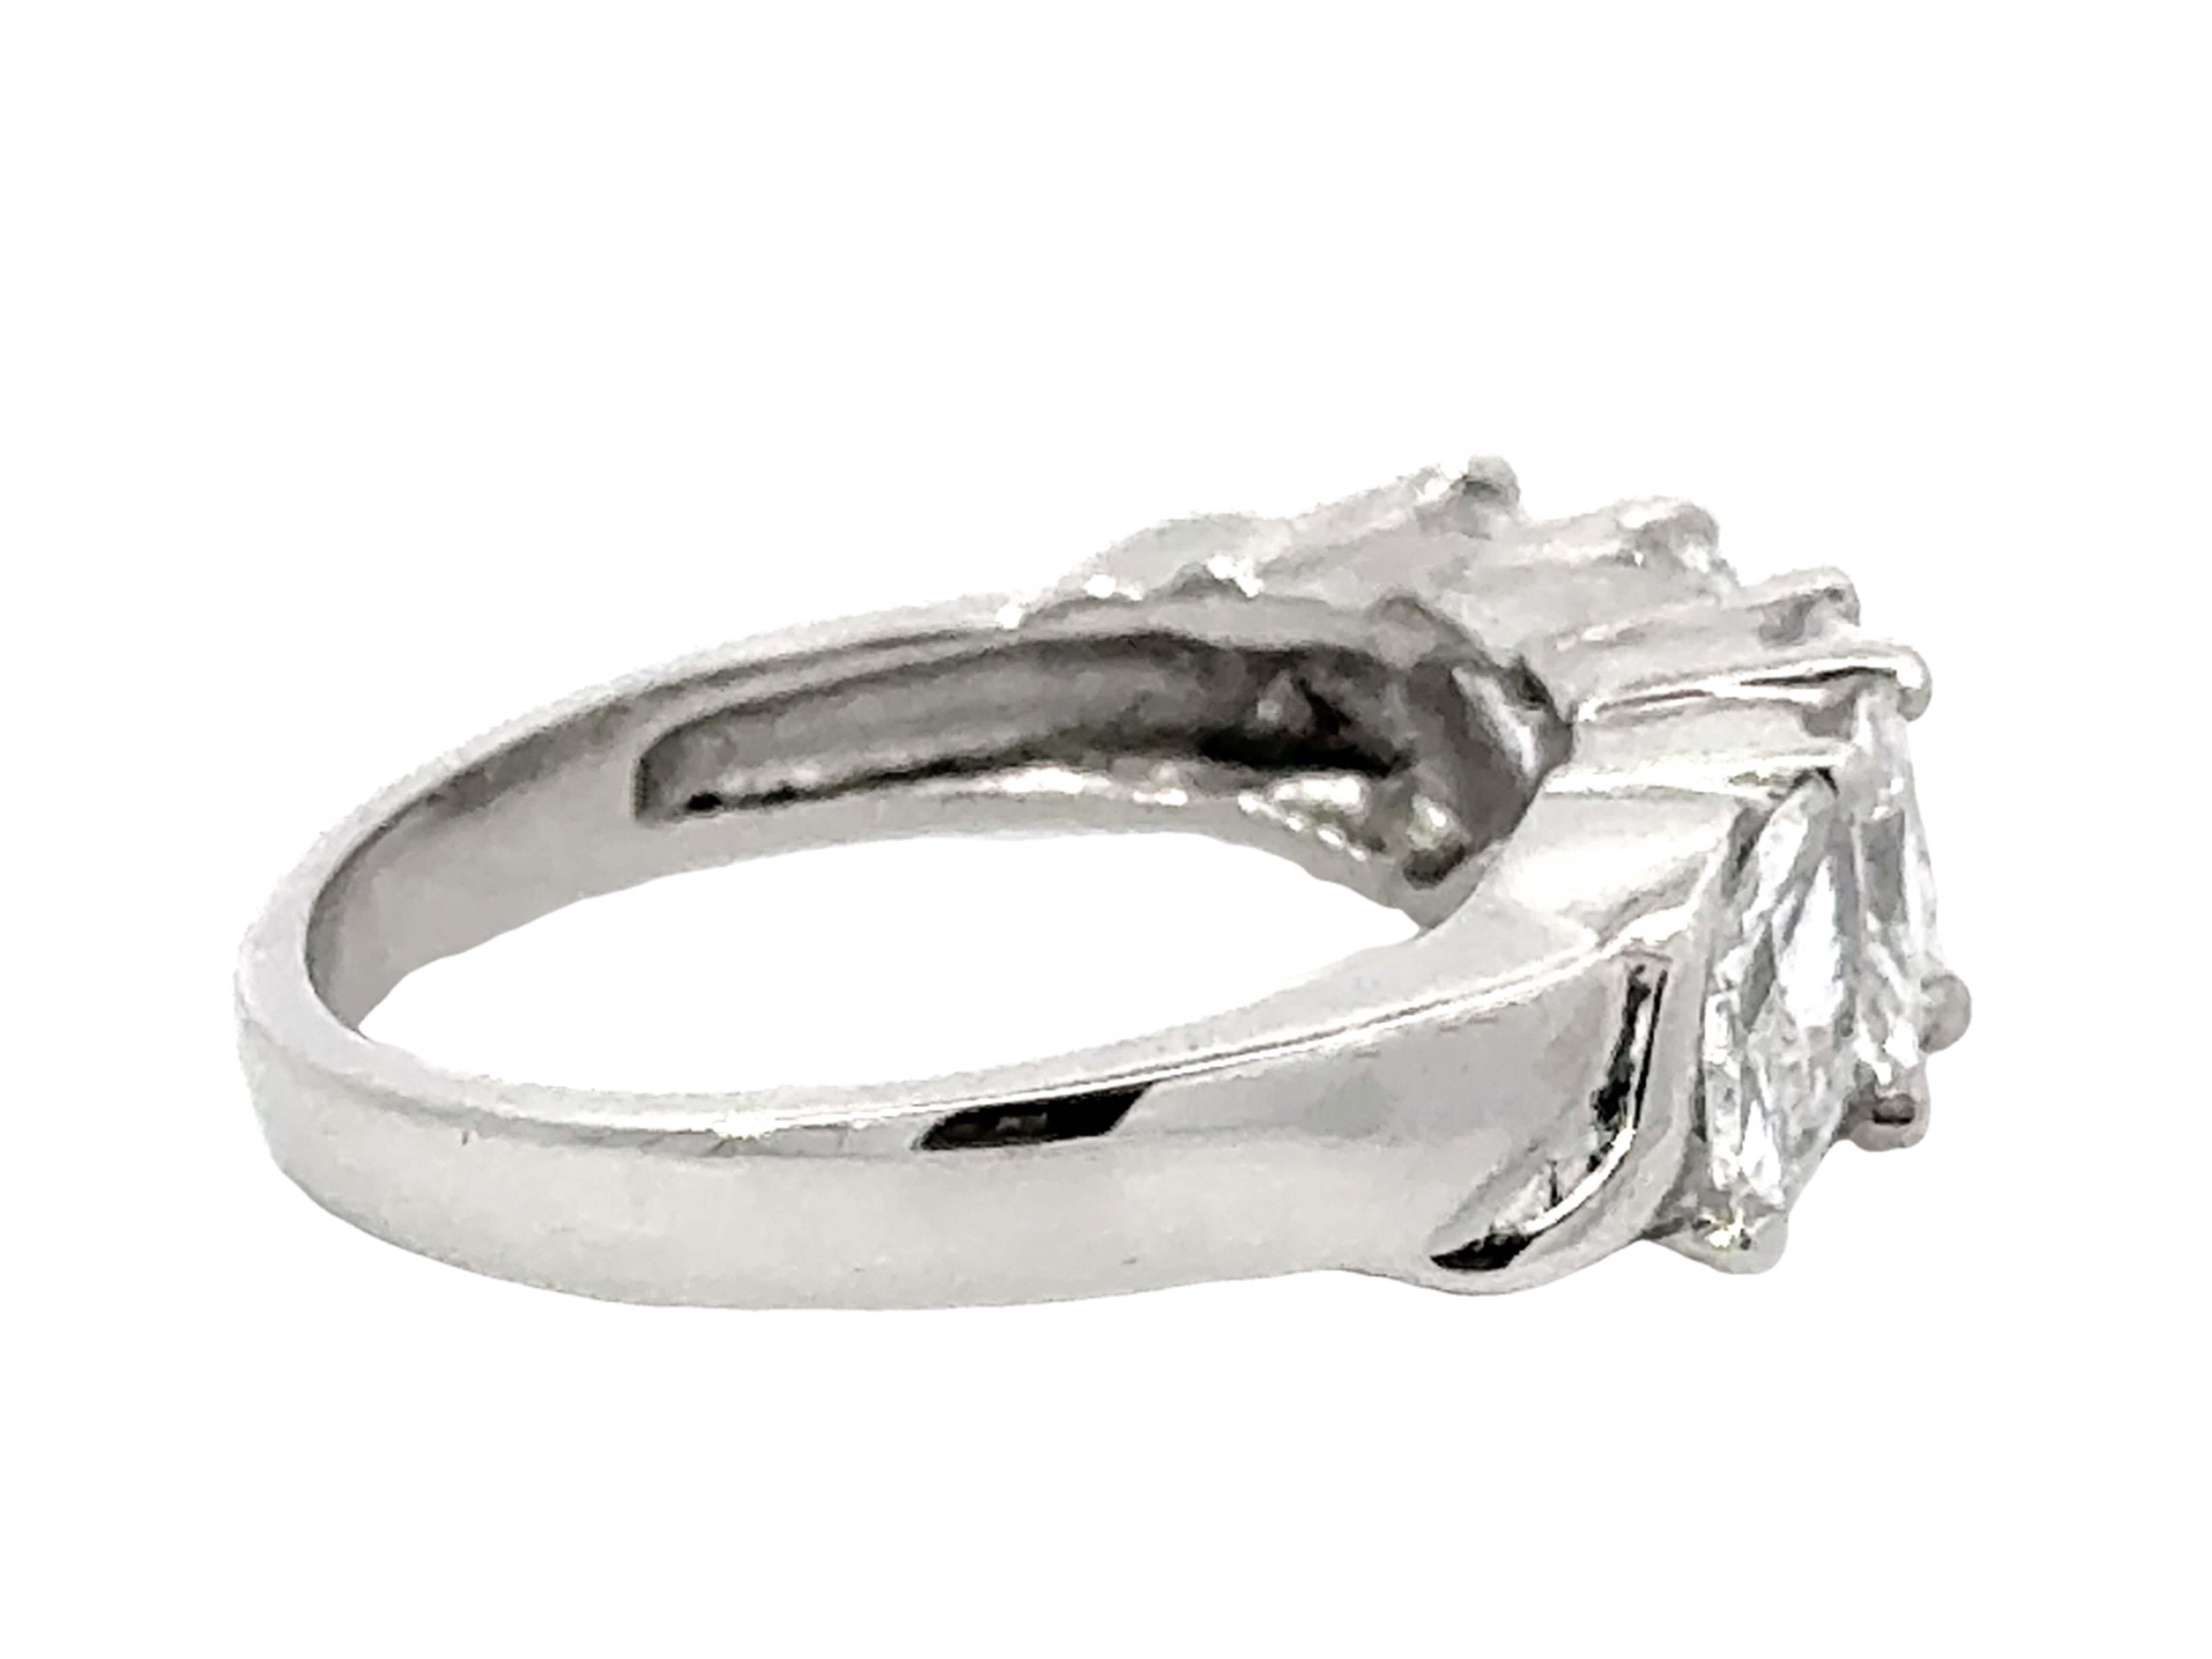 5 Marquise 1.50 Carat Diamond Band Ring Platinum In Excellent Condition For Sale In Honolulu, HI